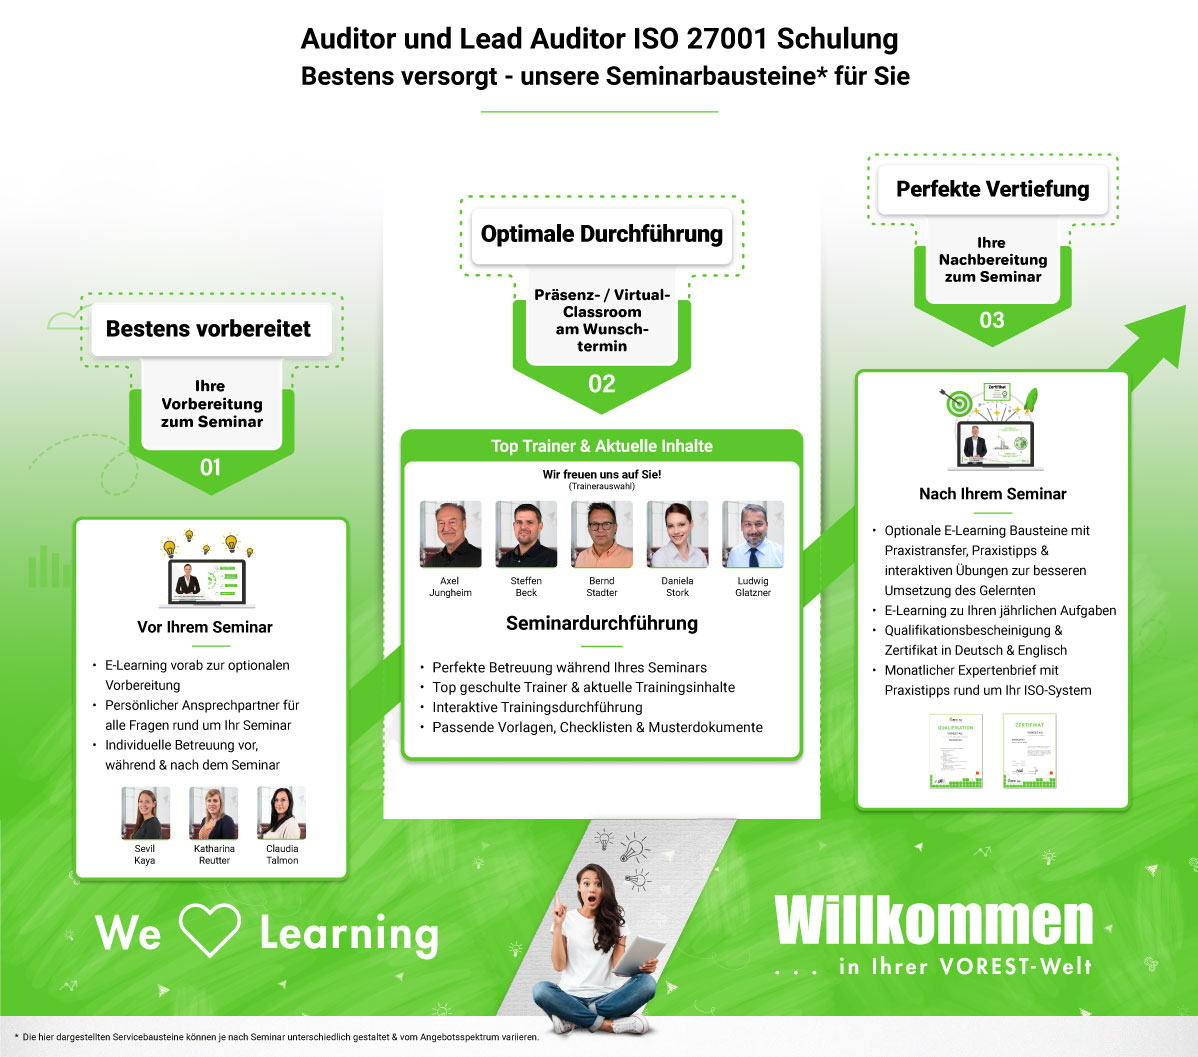 Auditor und Lead Auditor ISO 27001 Schulung